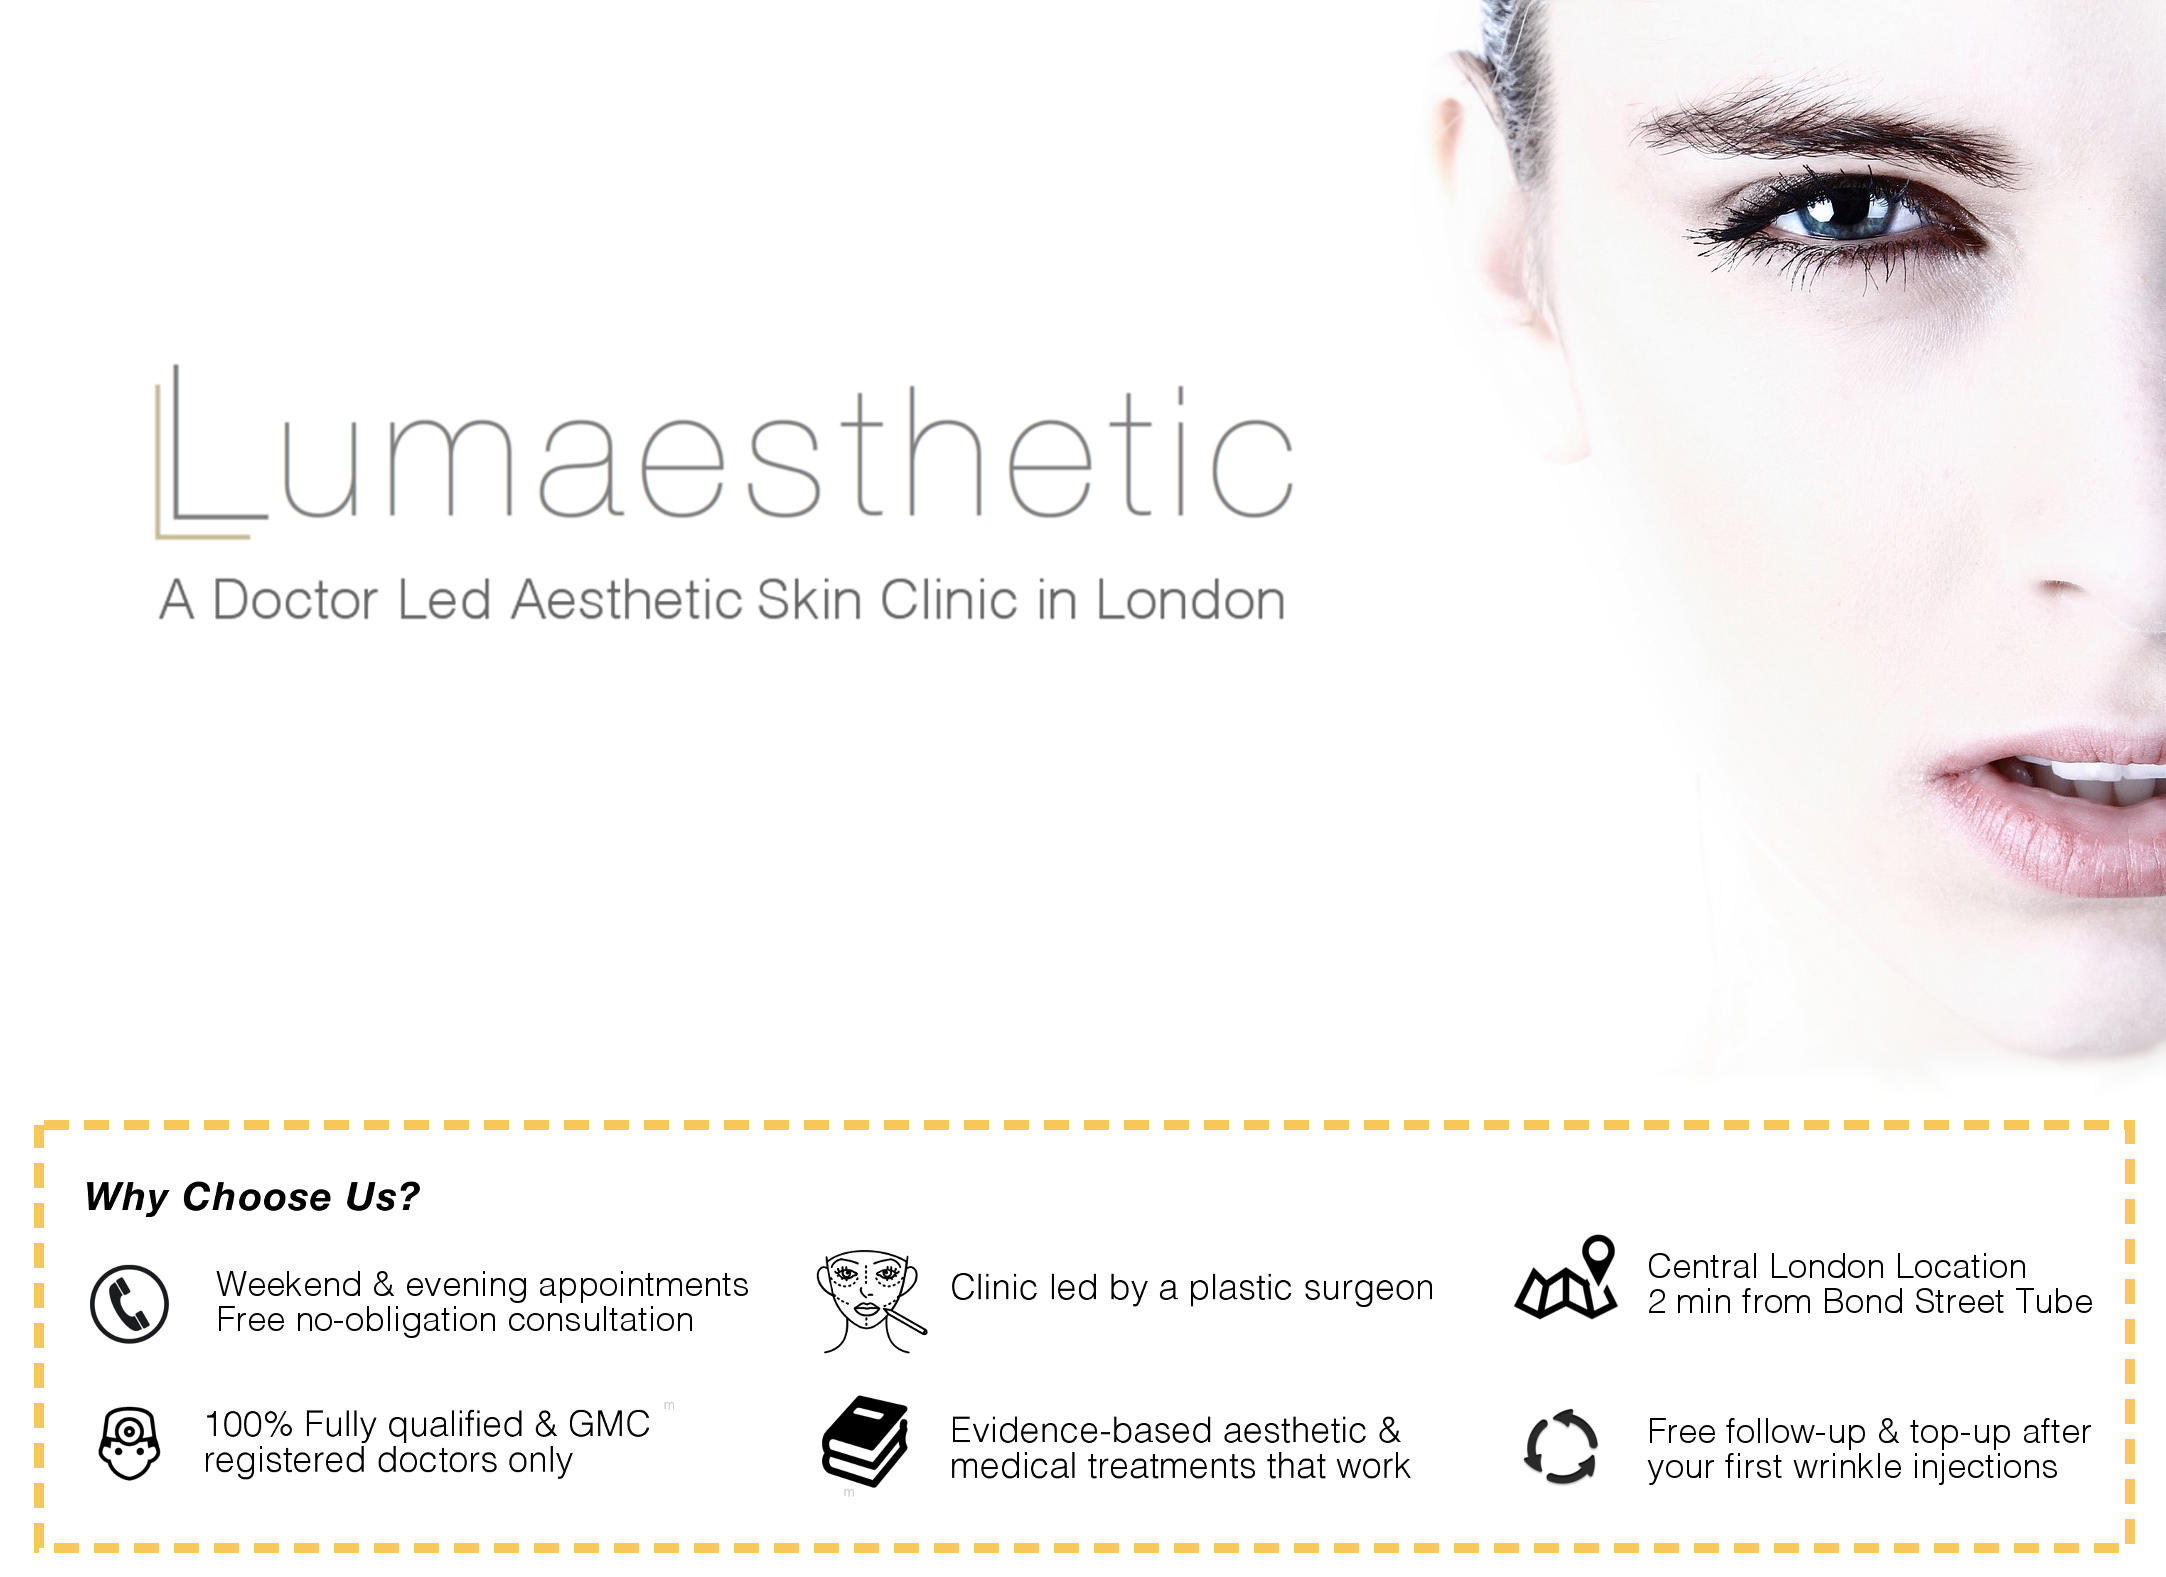 Skincare Clinic offering Botulinum toxin (botox), fillers, chemical peels